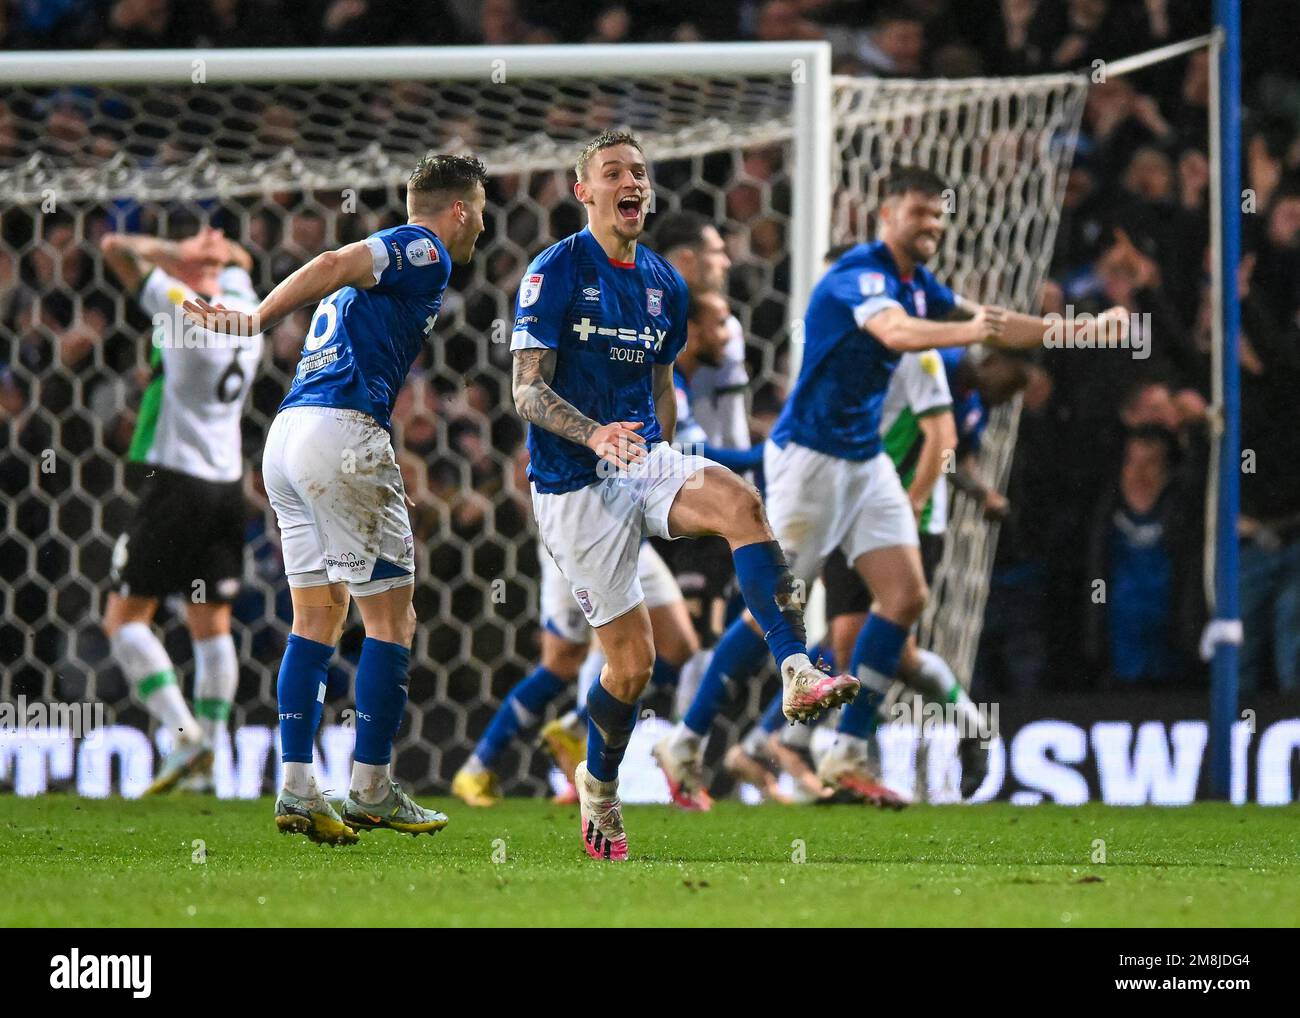 GOAL Ipswich Town defender Luke Woolfenden  (6) celebrates a goal to make it 0-1  during the Sky Bet League 1 match Ipswich Town vs Plymouth Argyle at Portman Road, Ipswich, United Kingdom, 14th January 2023  (Photo by Stanley Kasala/News Images) Stock Photo